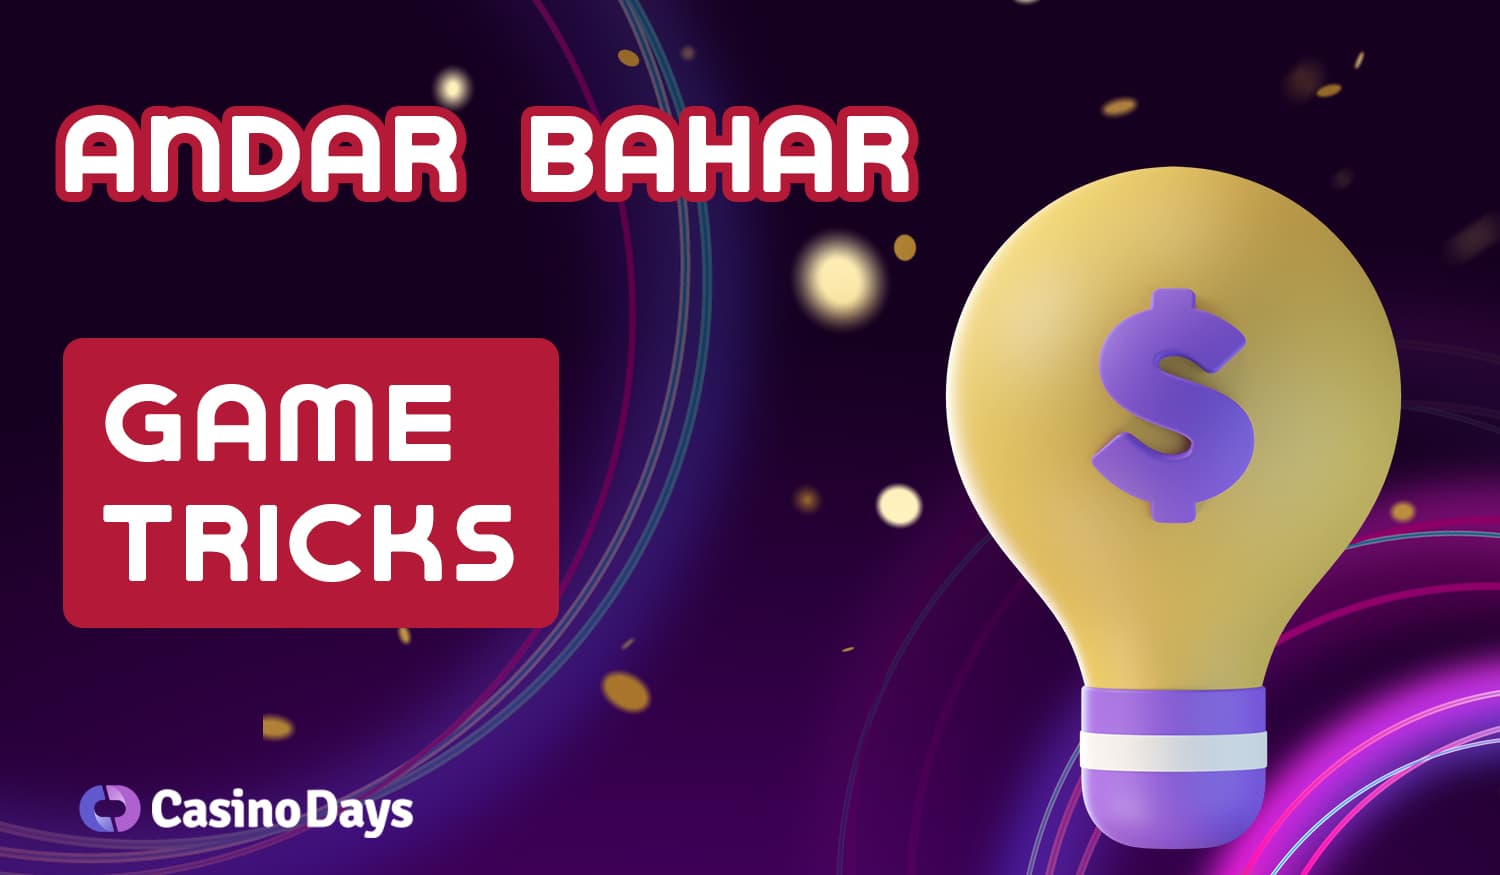 Winning strategies for playing Andar Bahar at Casino Days online casino site